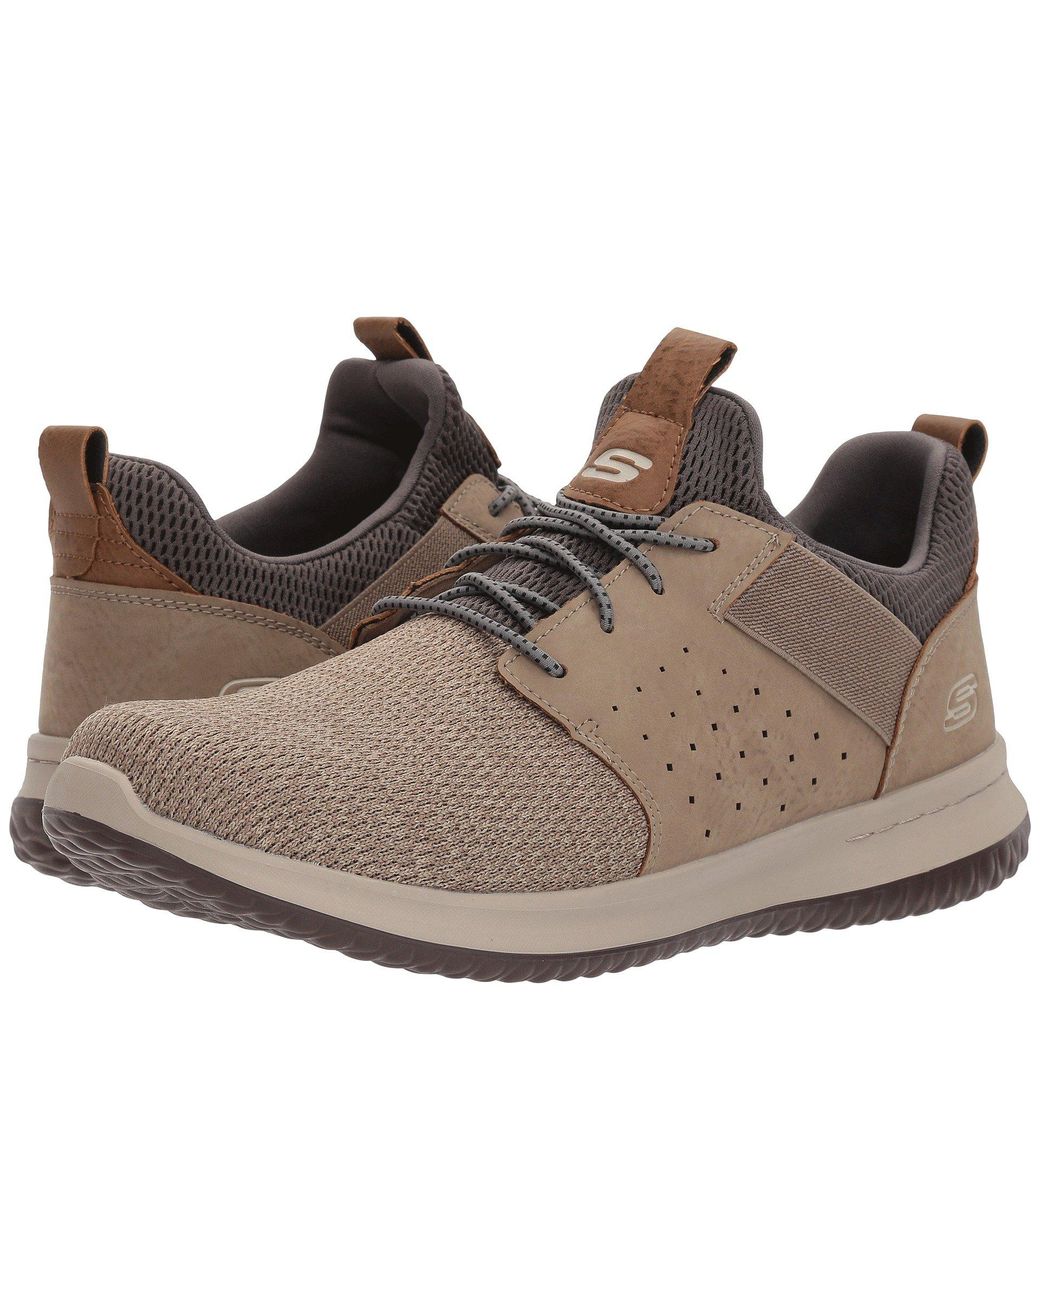 Skechers Classic Fit Delson Camben in Taupe (Brown) for Men - Lyst